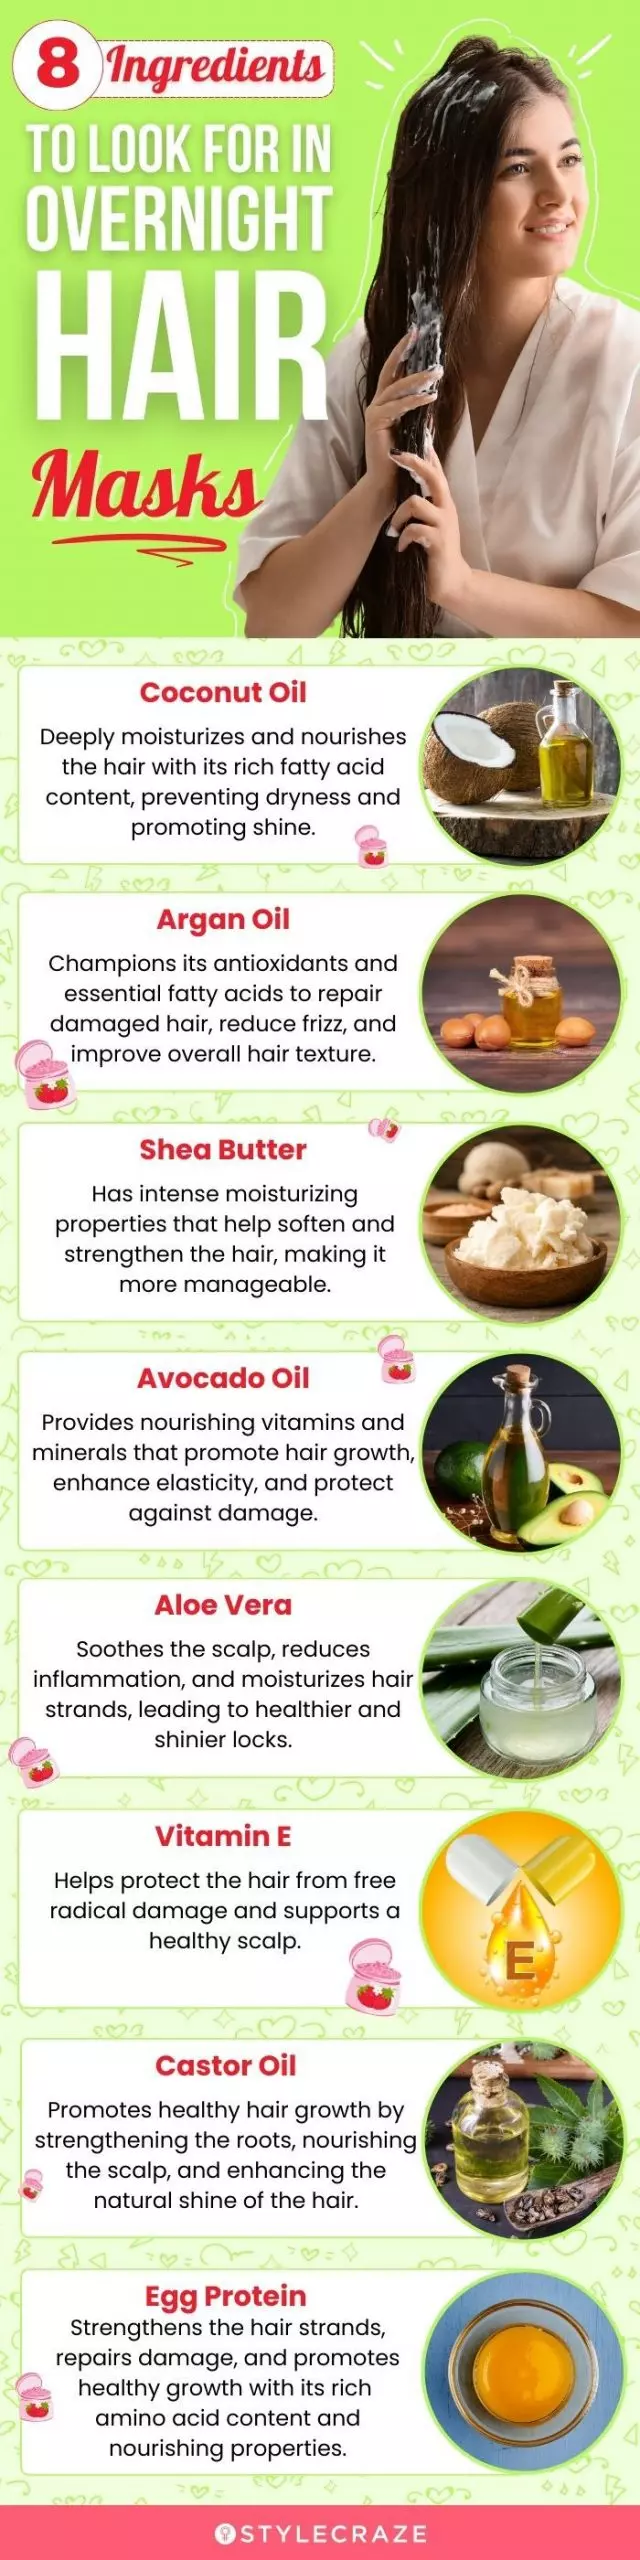 8 Ingredients To Look For In Overnight Hair Masks (infographic)